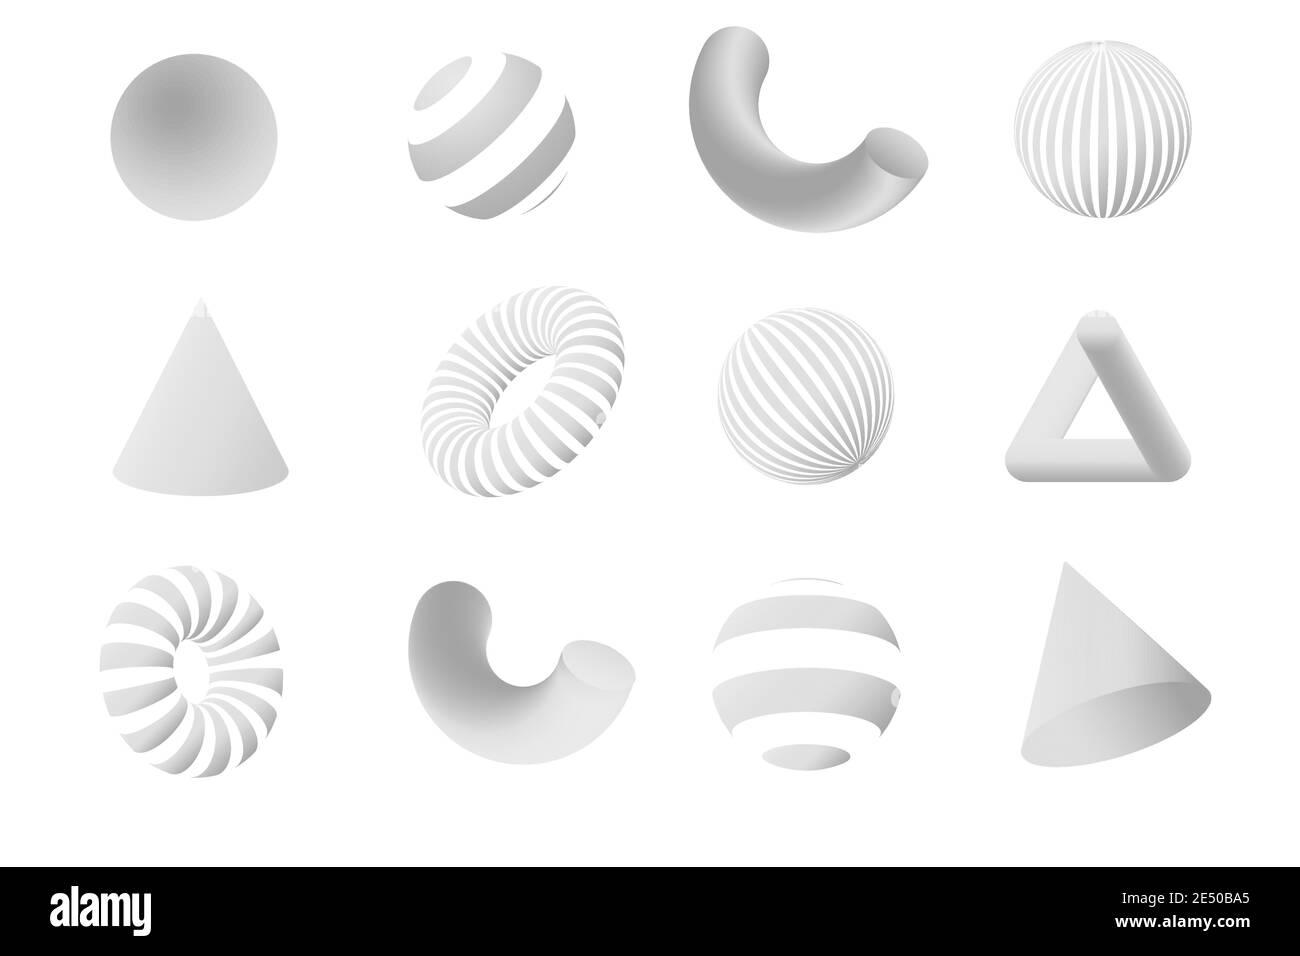 White geometry 3D shapes set. Vector design elements for social media and visual content, web and UI design, posters and art collage, branding. Stock Vector